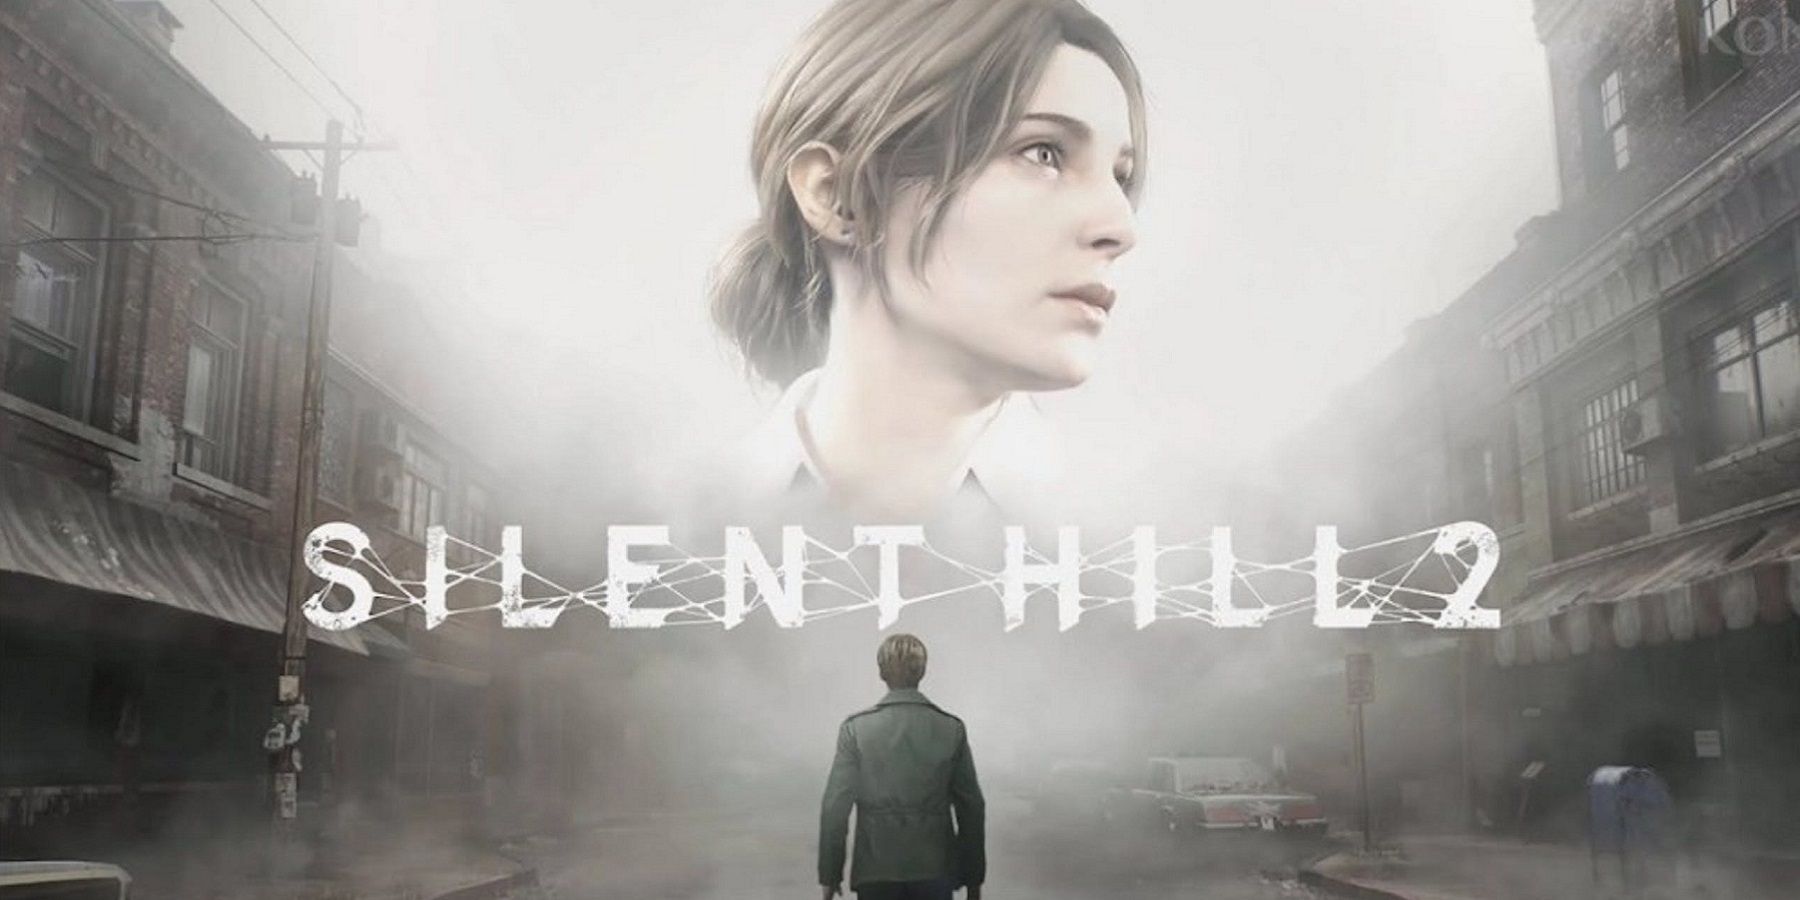 Image from the Silent Hill 2 remake showing James wandering the foggy town with a vision of Mary in the sky.